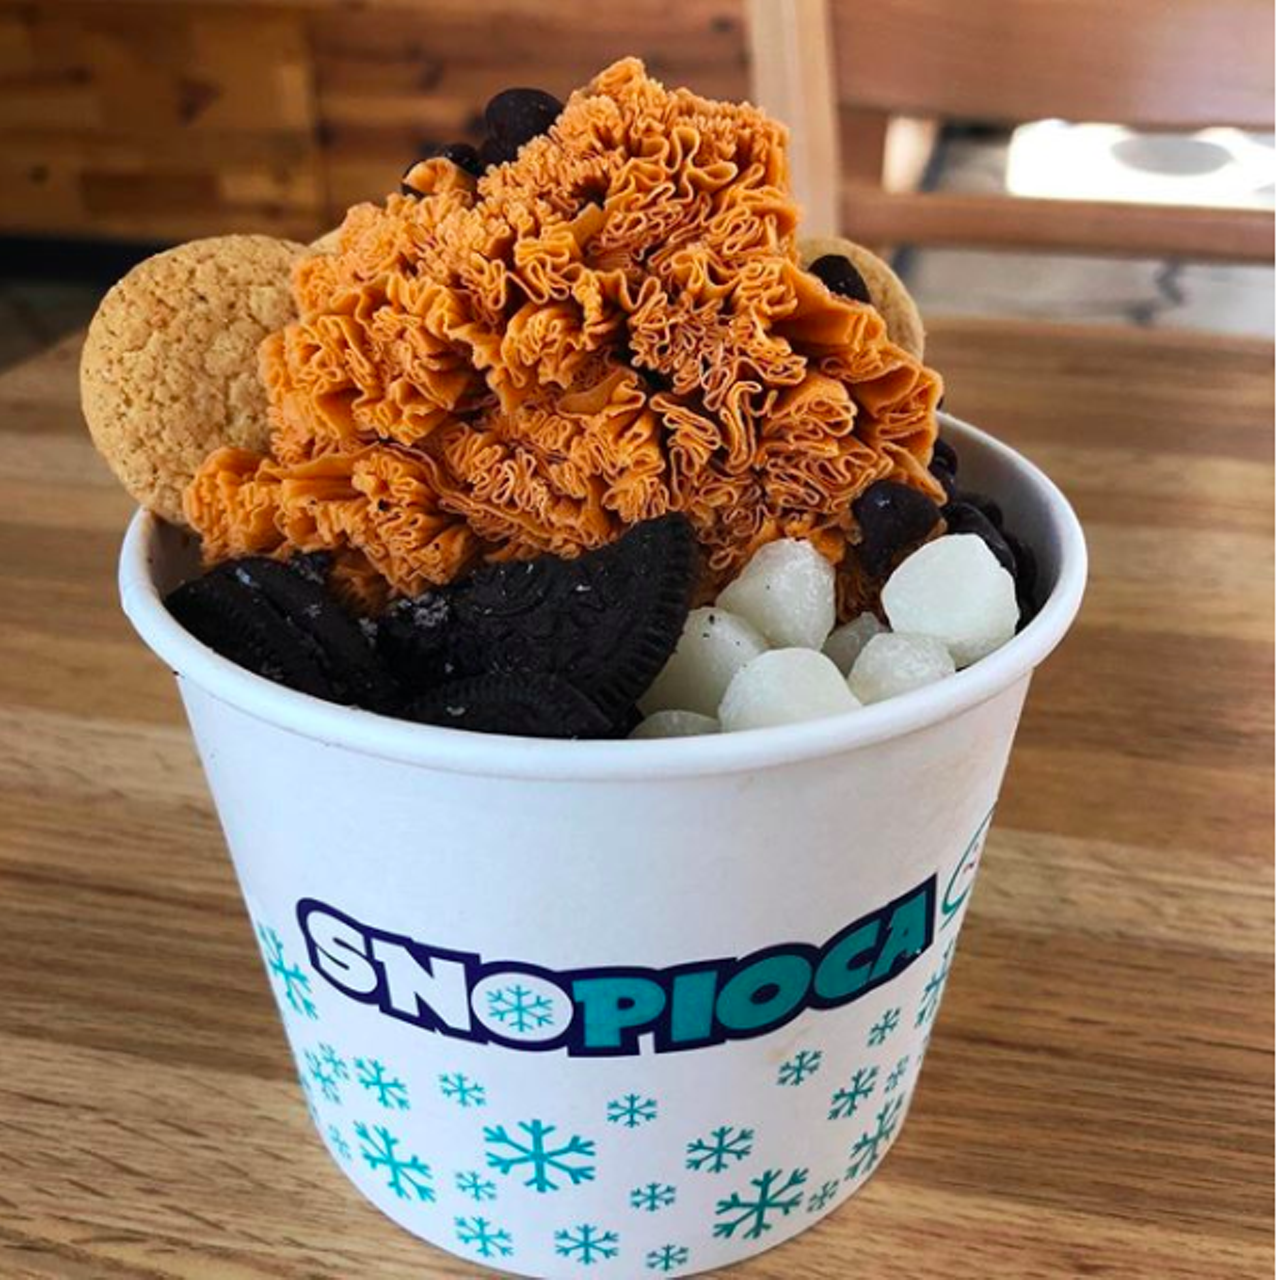 Snopioca
6423 Babcock Rd, Suite 104, (210) 455 -8638
San Antonio's first Taiwanese shaved ice shop is still shaving along with new flavors including their latest tea-flavored iced. Customize your own bowl for a light and fluffy cool down. 
Photo via Instagram / snopioca